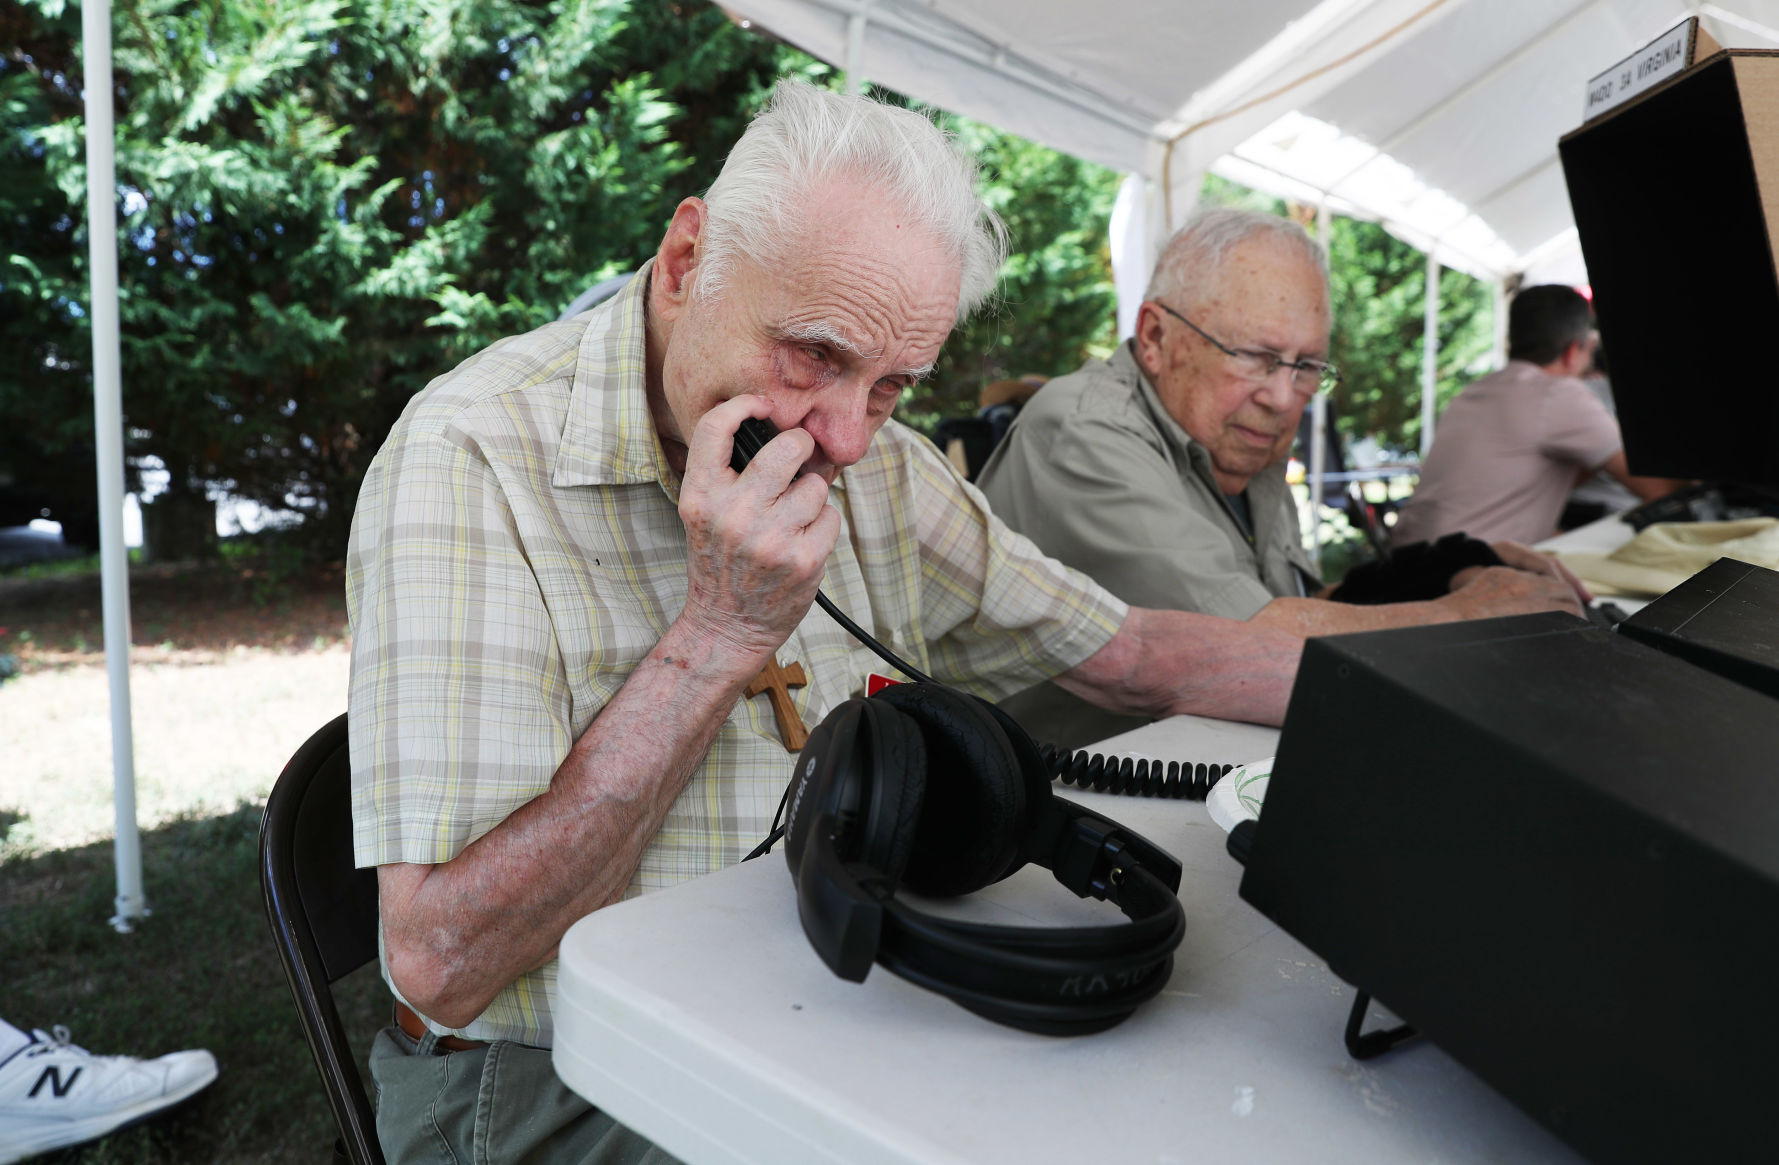 At field day, ham radio enthusiasts show off their magic picture picture